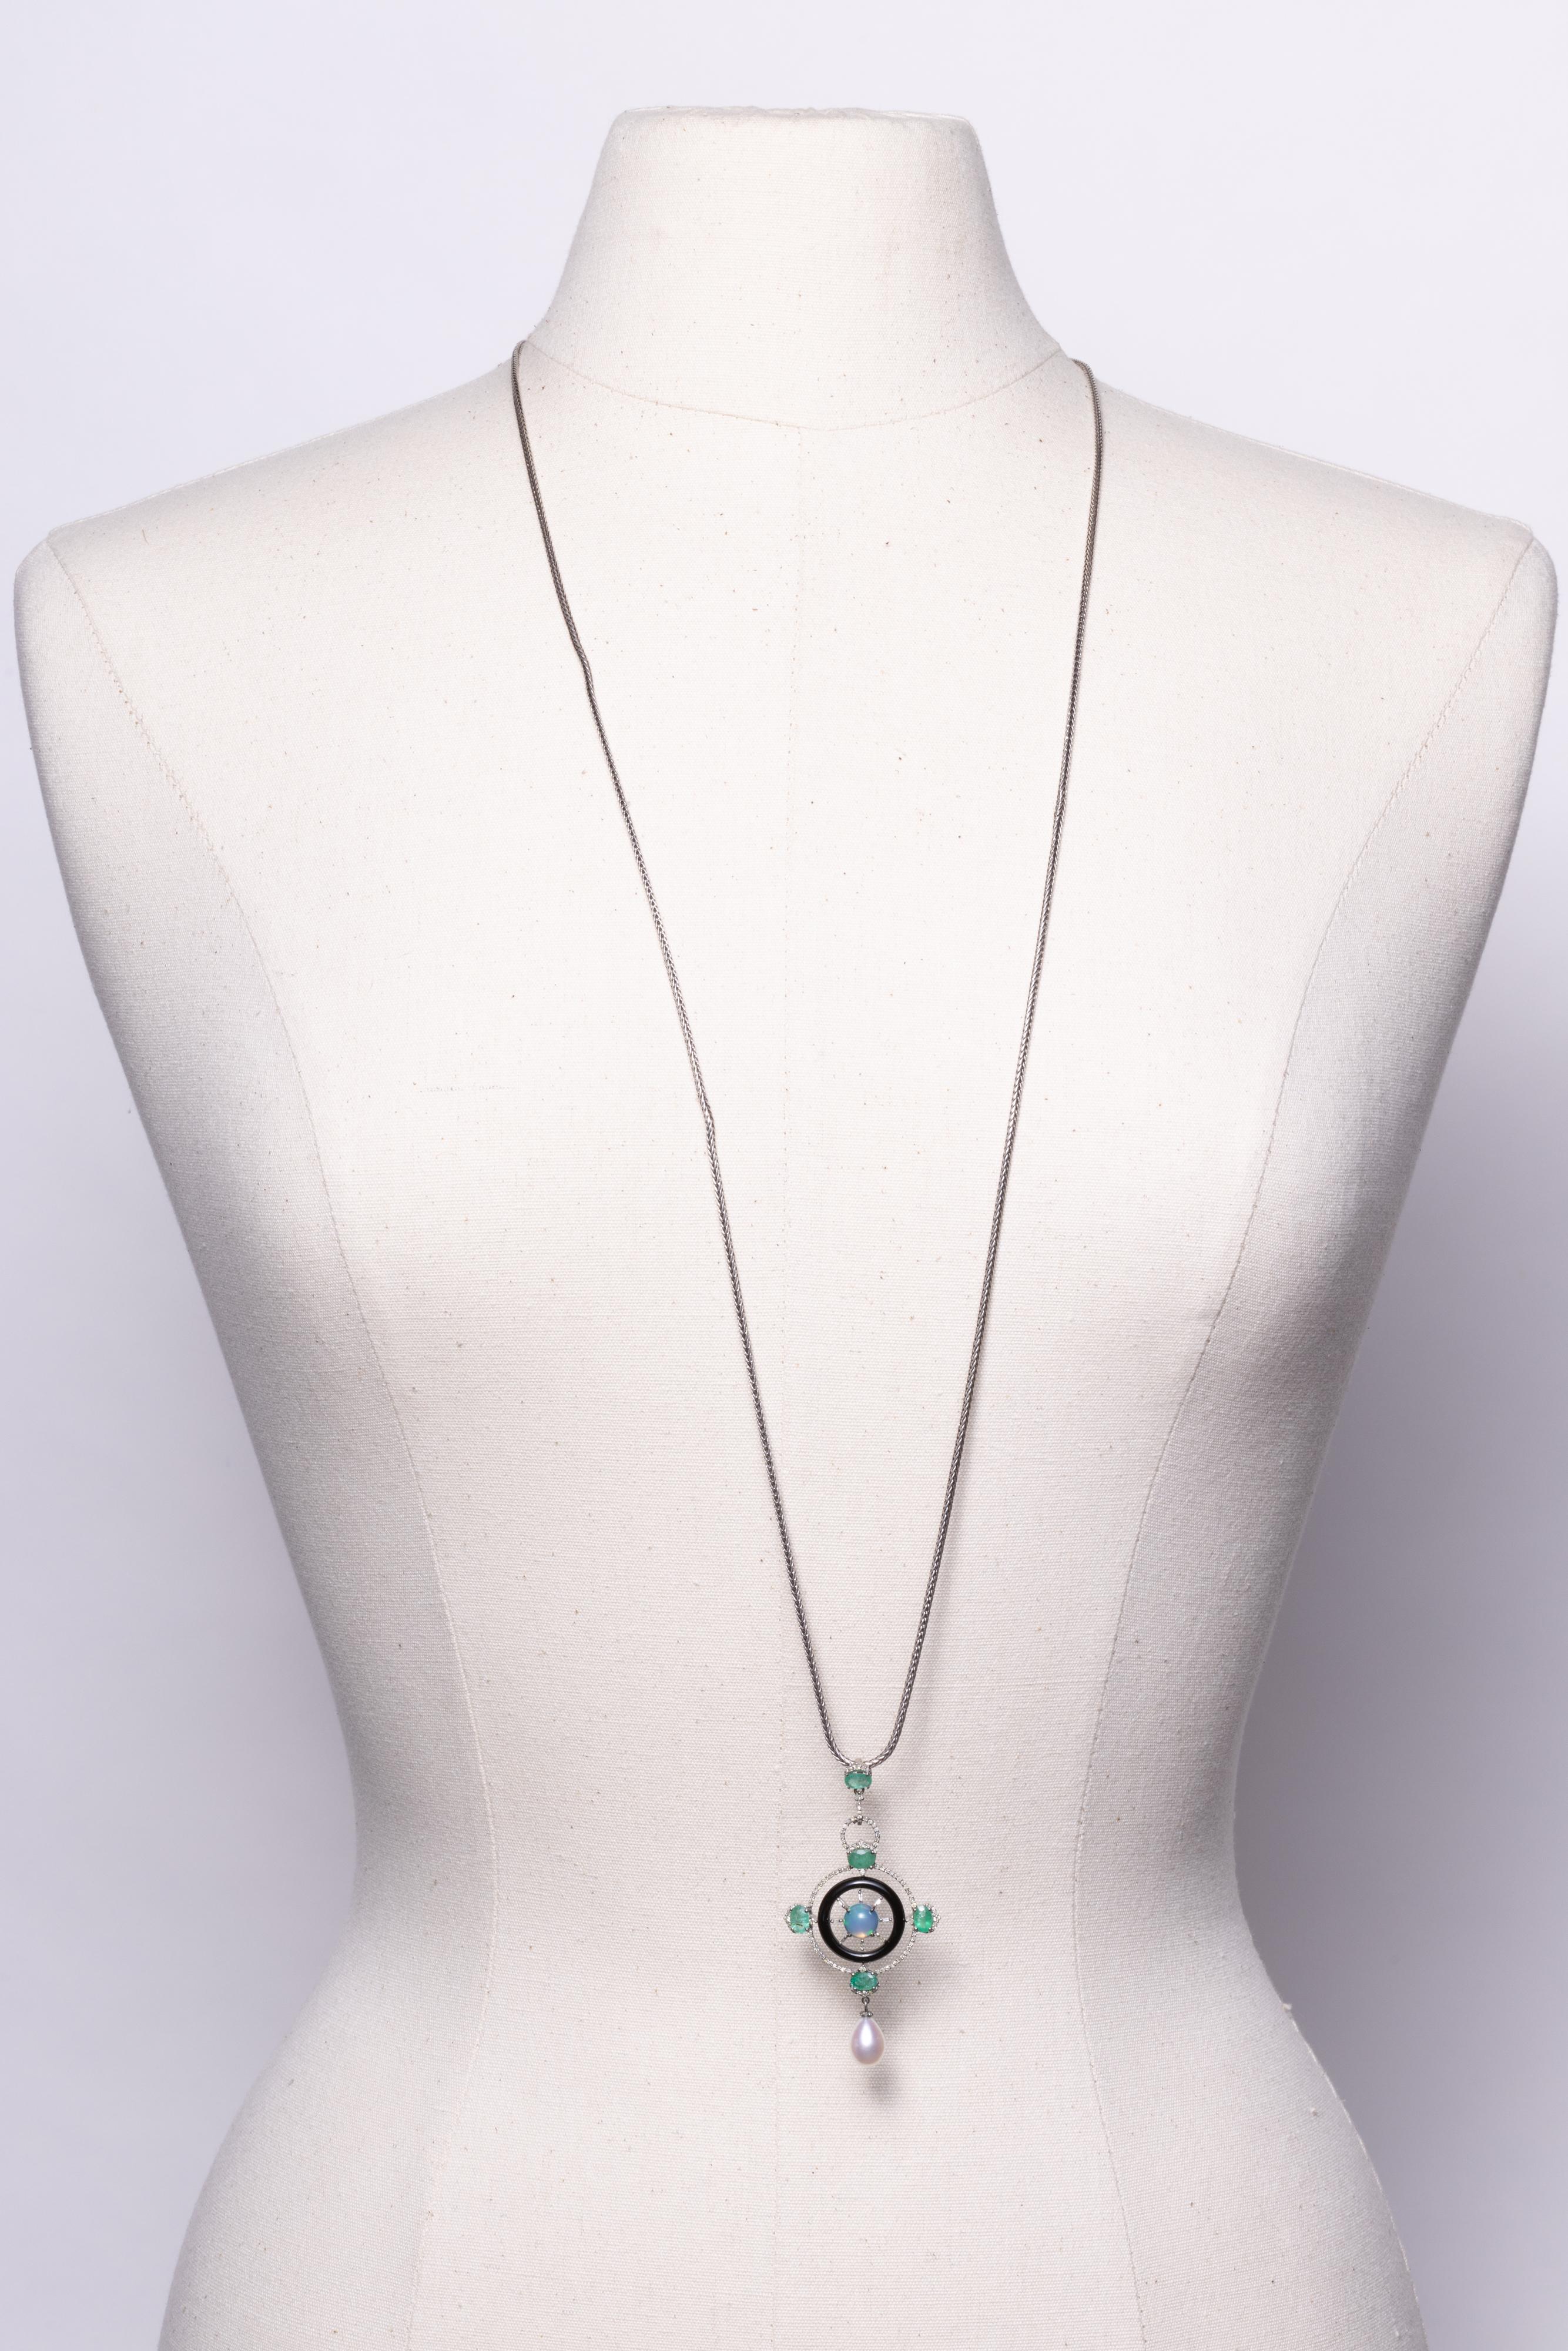 Round Cut Pendant Necklace with Emeralds, Diamonds, Opal and Pearl, Worn Long or Short